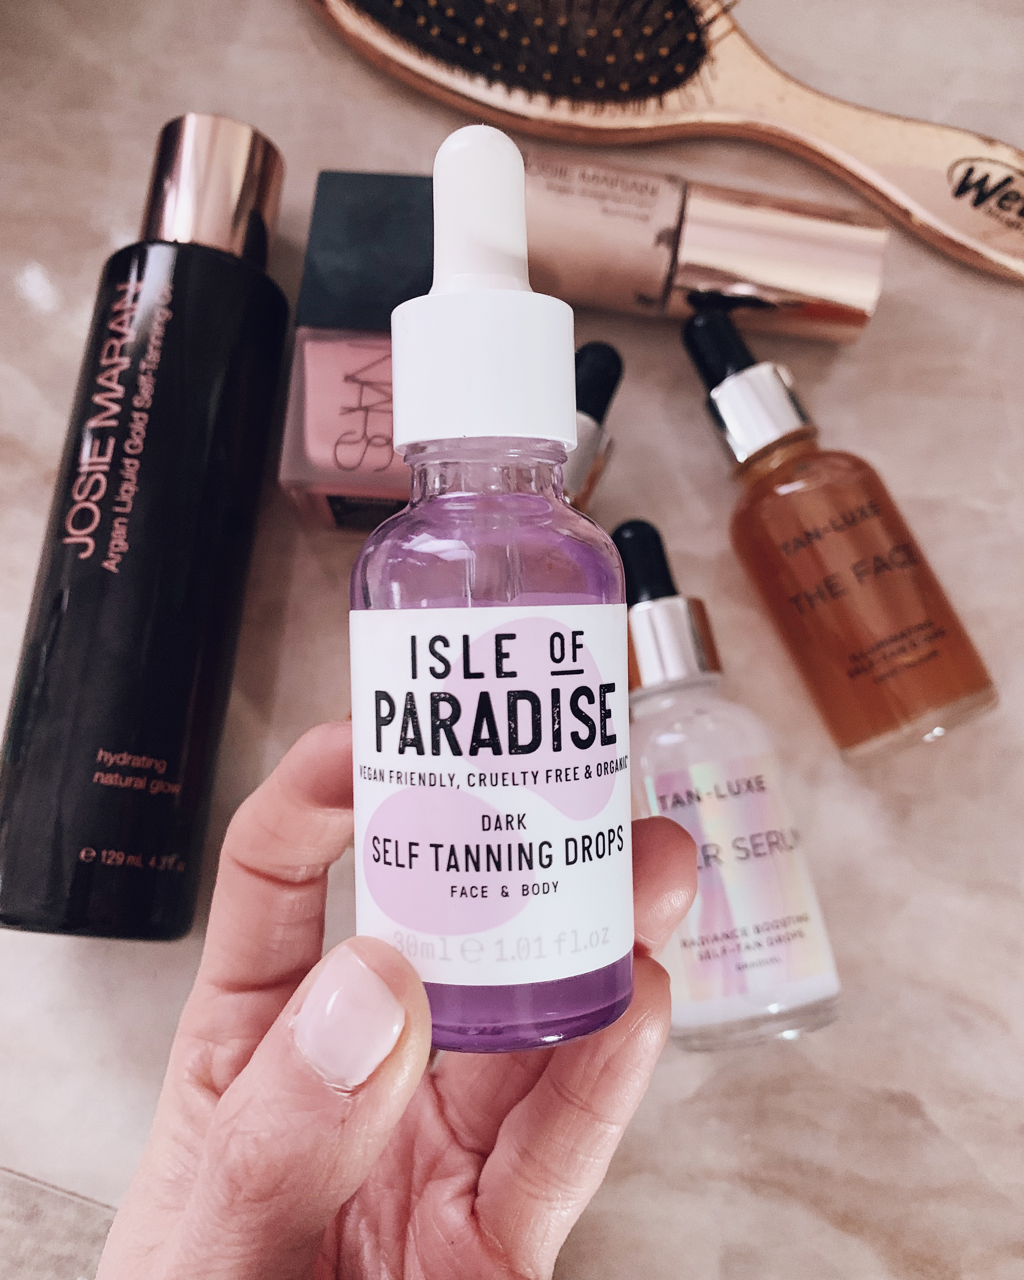 isle of paradise sunless tanning self tanner drops dark for face and body, sunless tanning routine and best self-tanner products, how to use